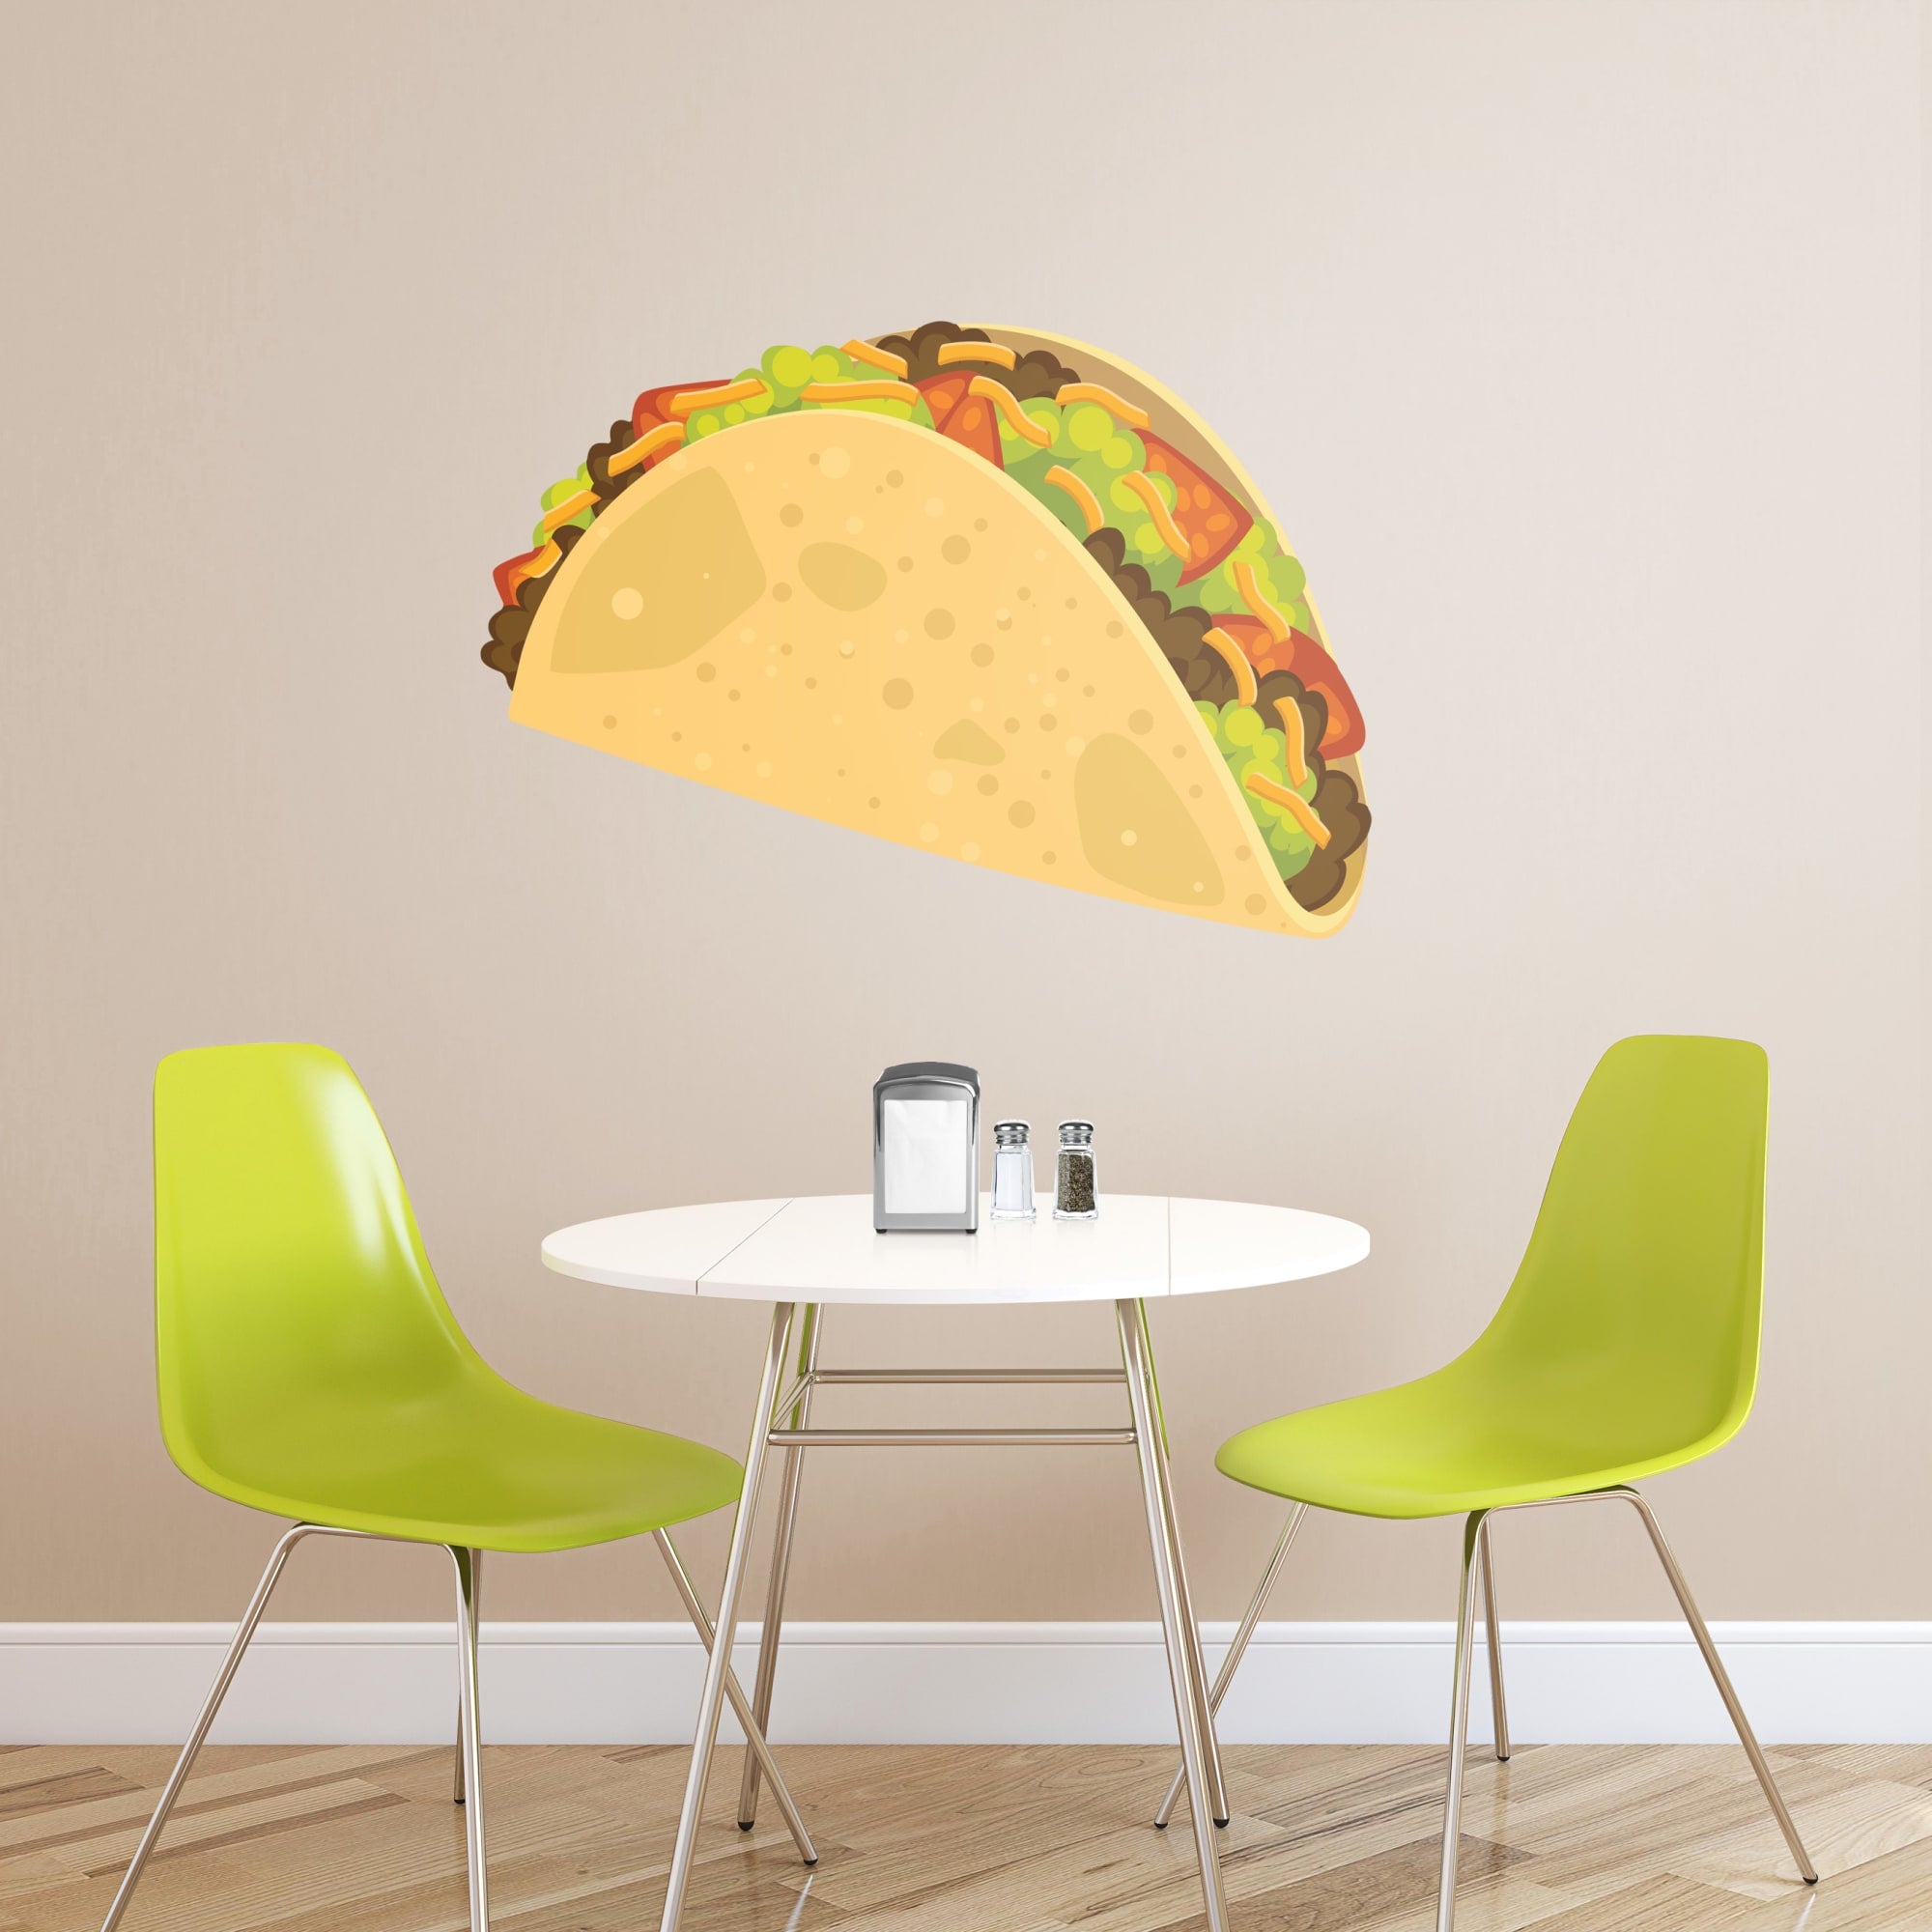 Taco: Illustrated - Removable Vinyl Decal Giant Taco + 2 Decals (49"W x 34"H) by Fathead